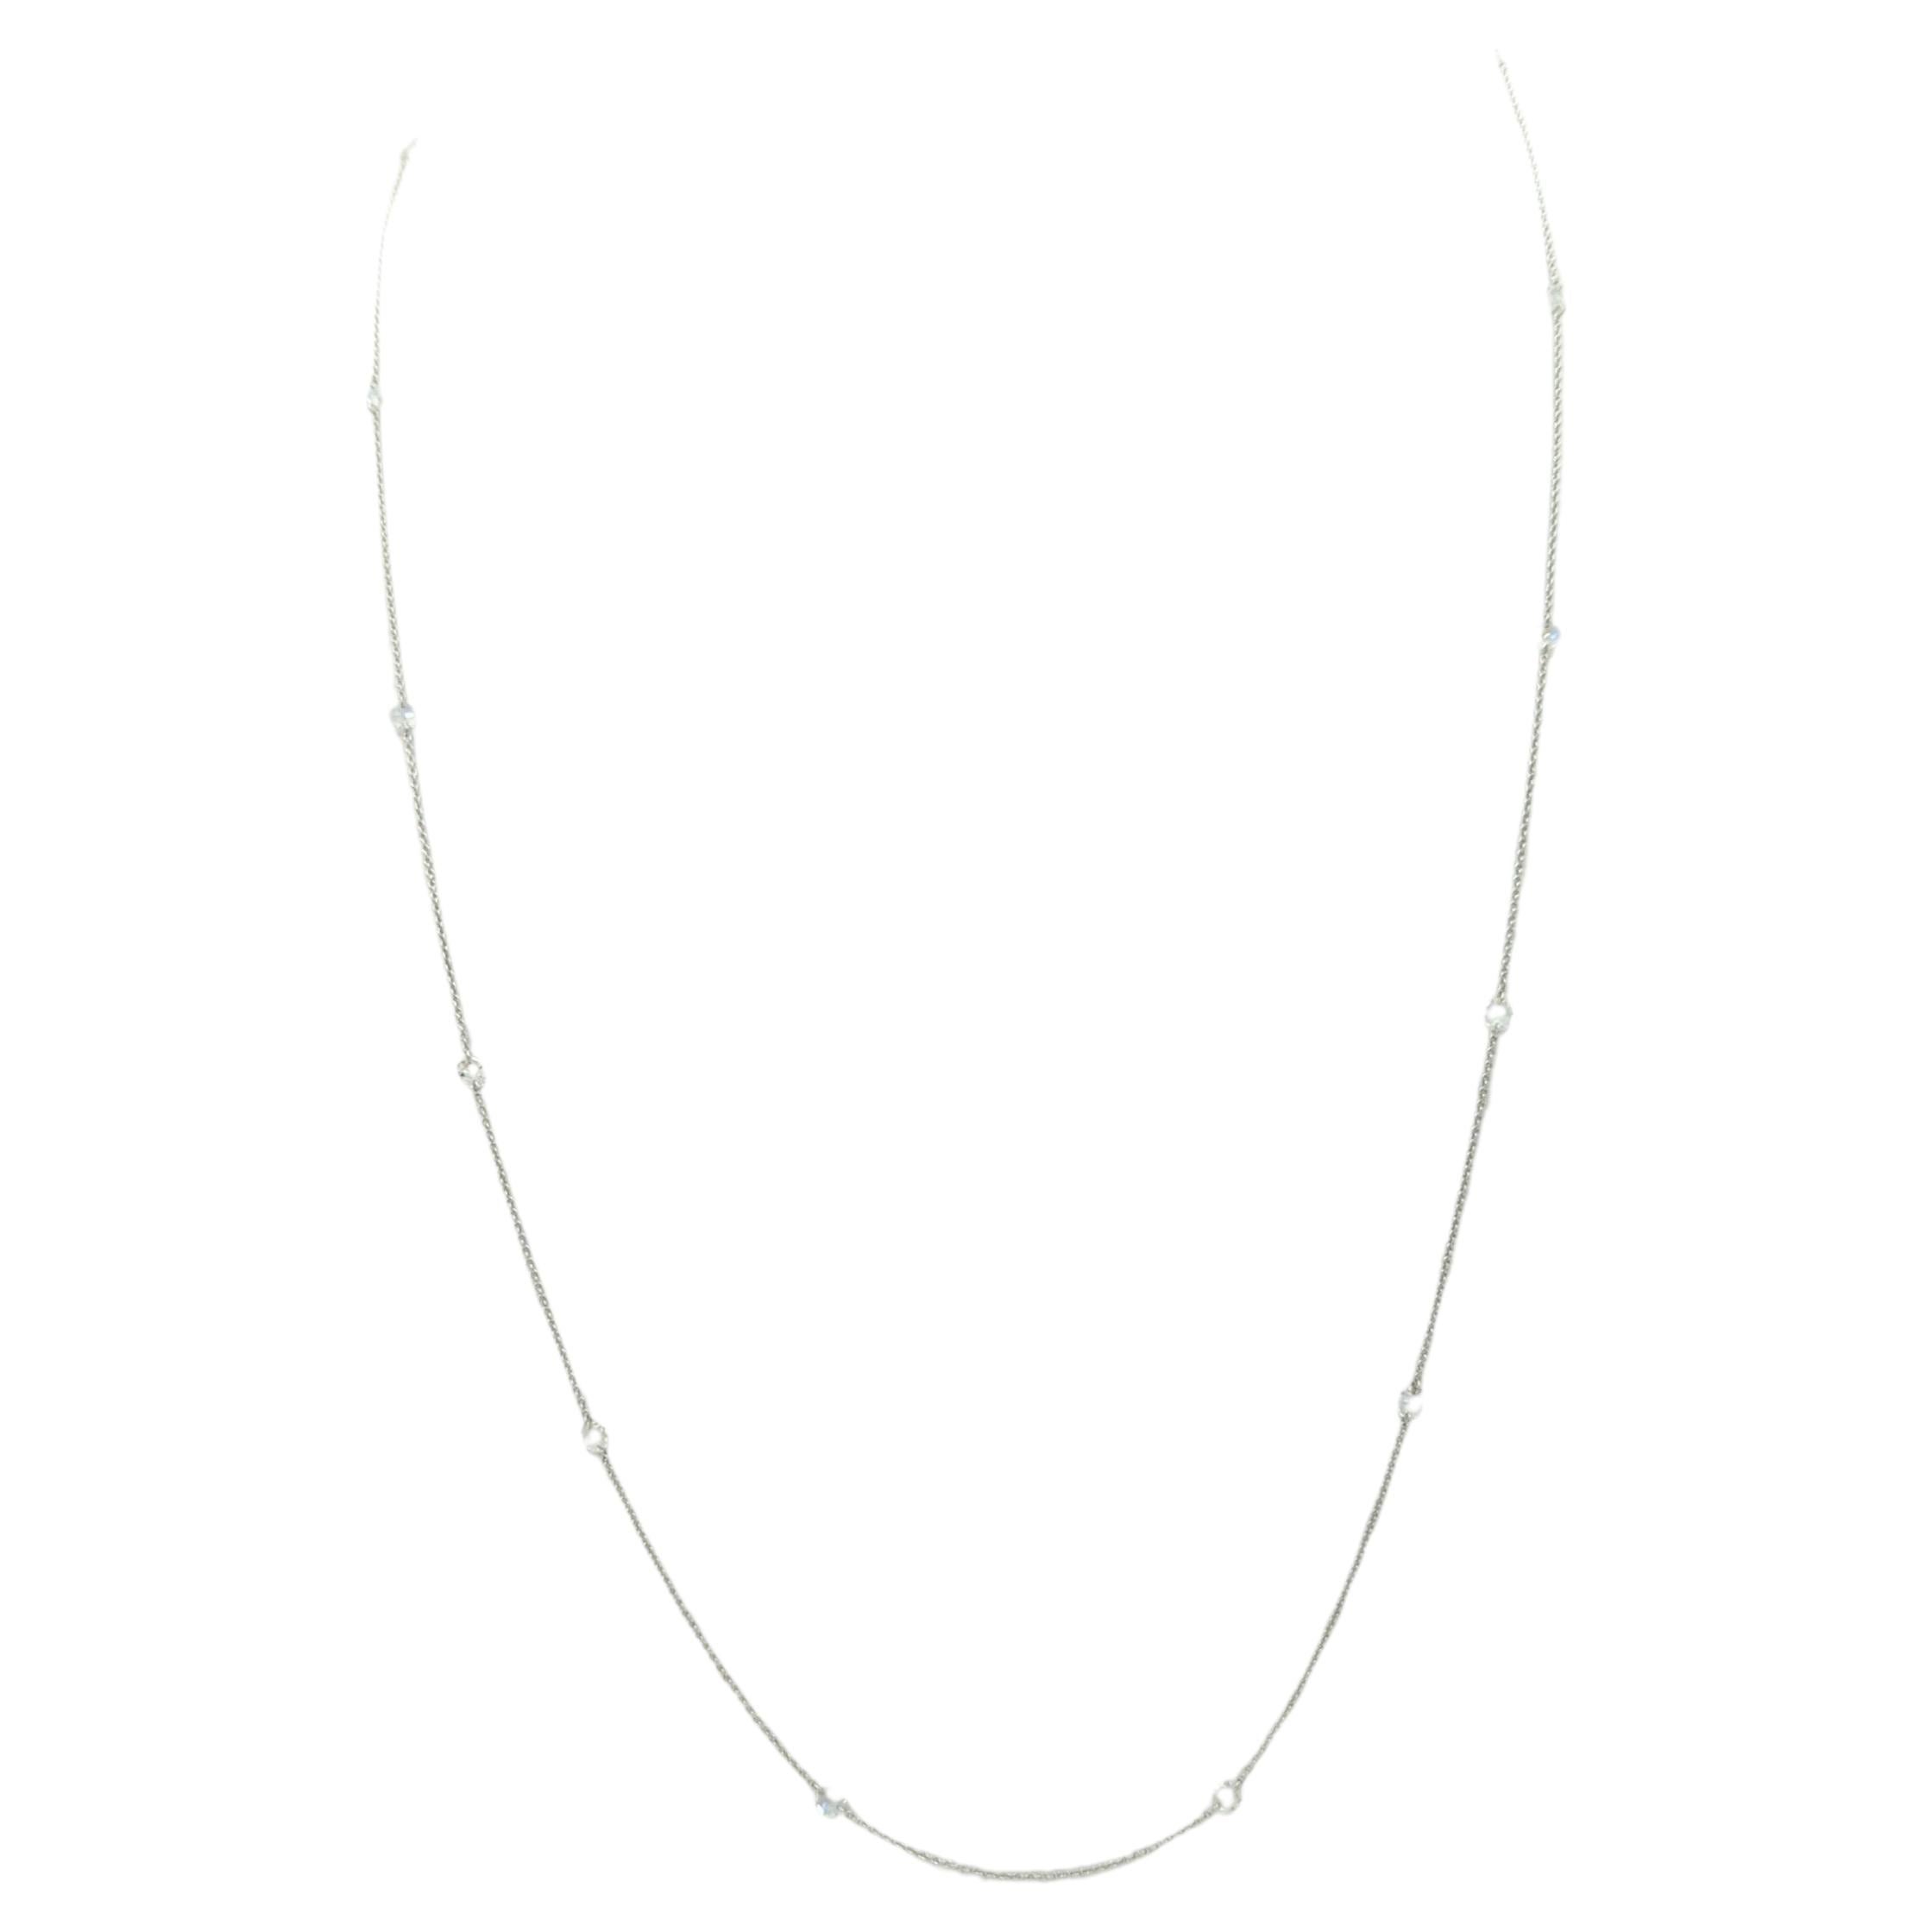 Rose Cut White Diamond Necklace in 18K White Gold